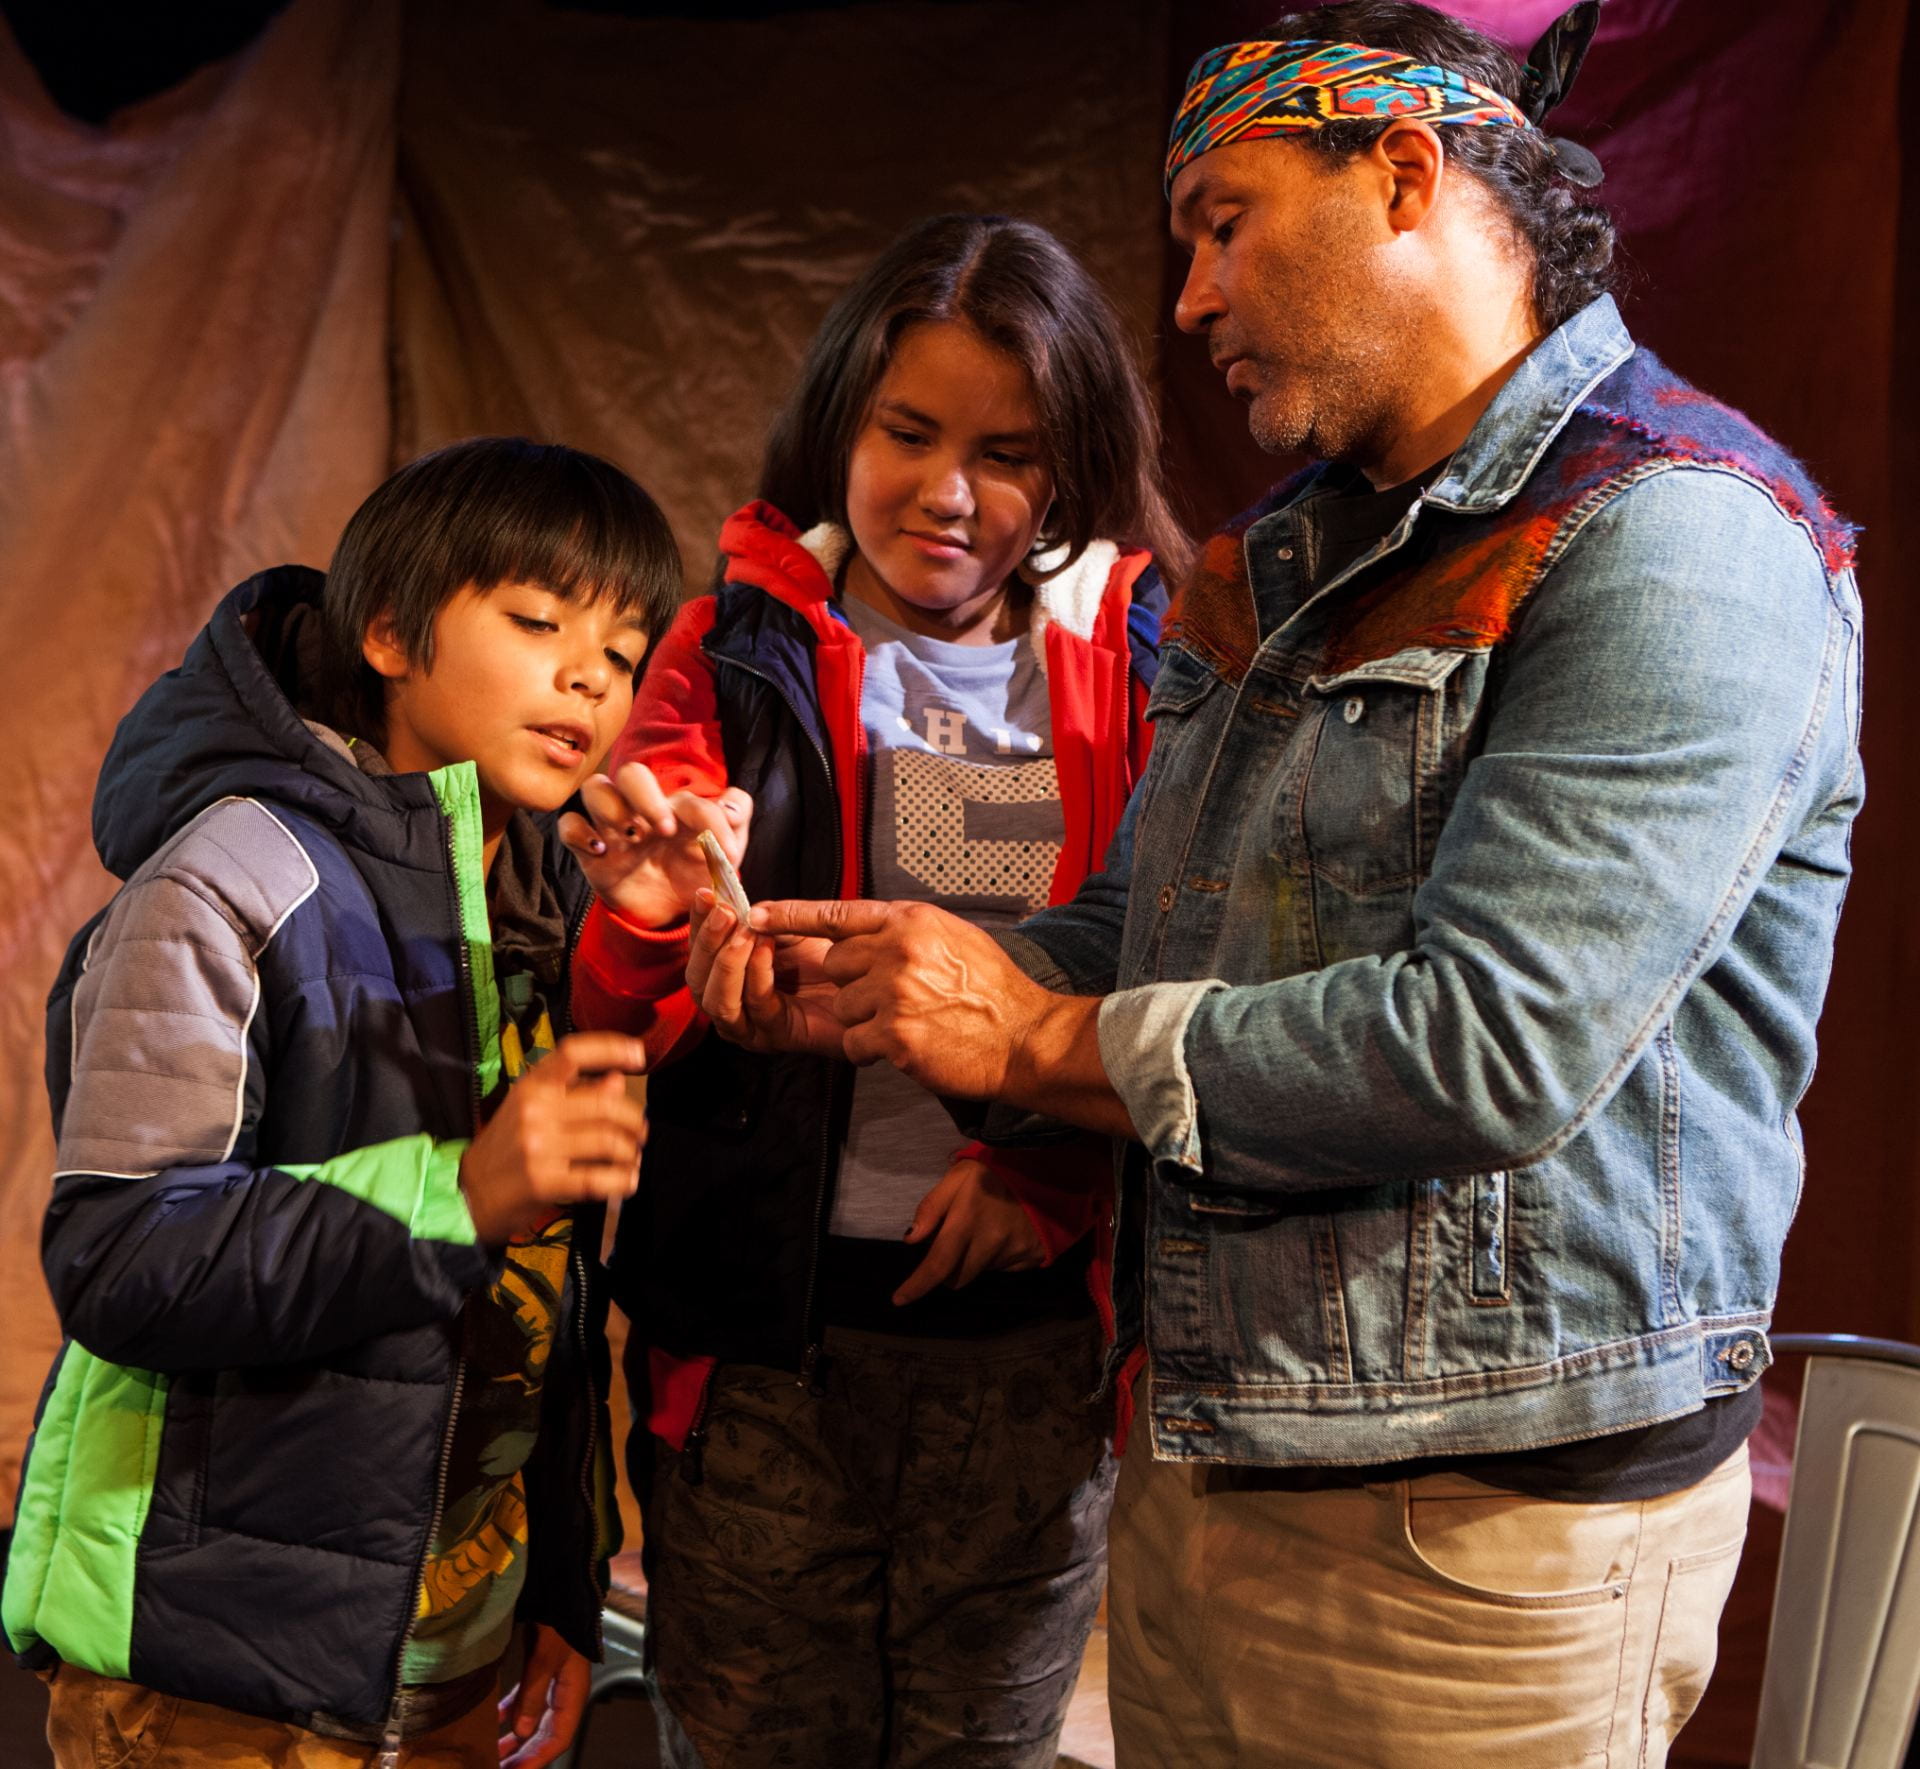 Production still from Amerinda, INC.'s adaptation of Powwow Highway, adapted by William S. Yellowrobe, Jr. and directed by Madeline Sayet. Image depicts an an older man talking with two young kids as they examine an object in the man's hand. 